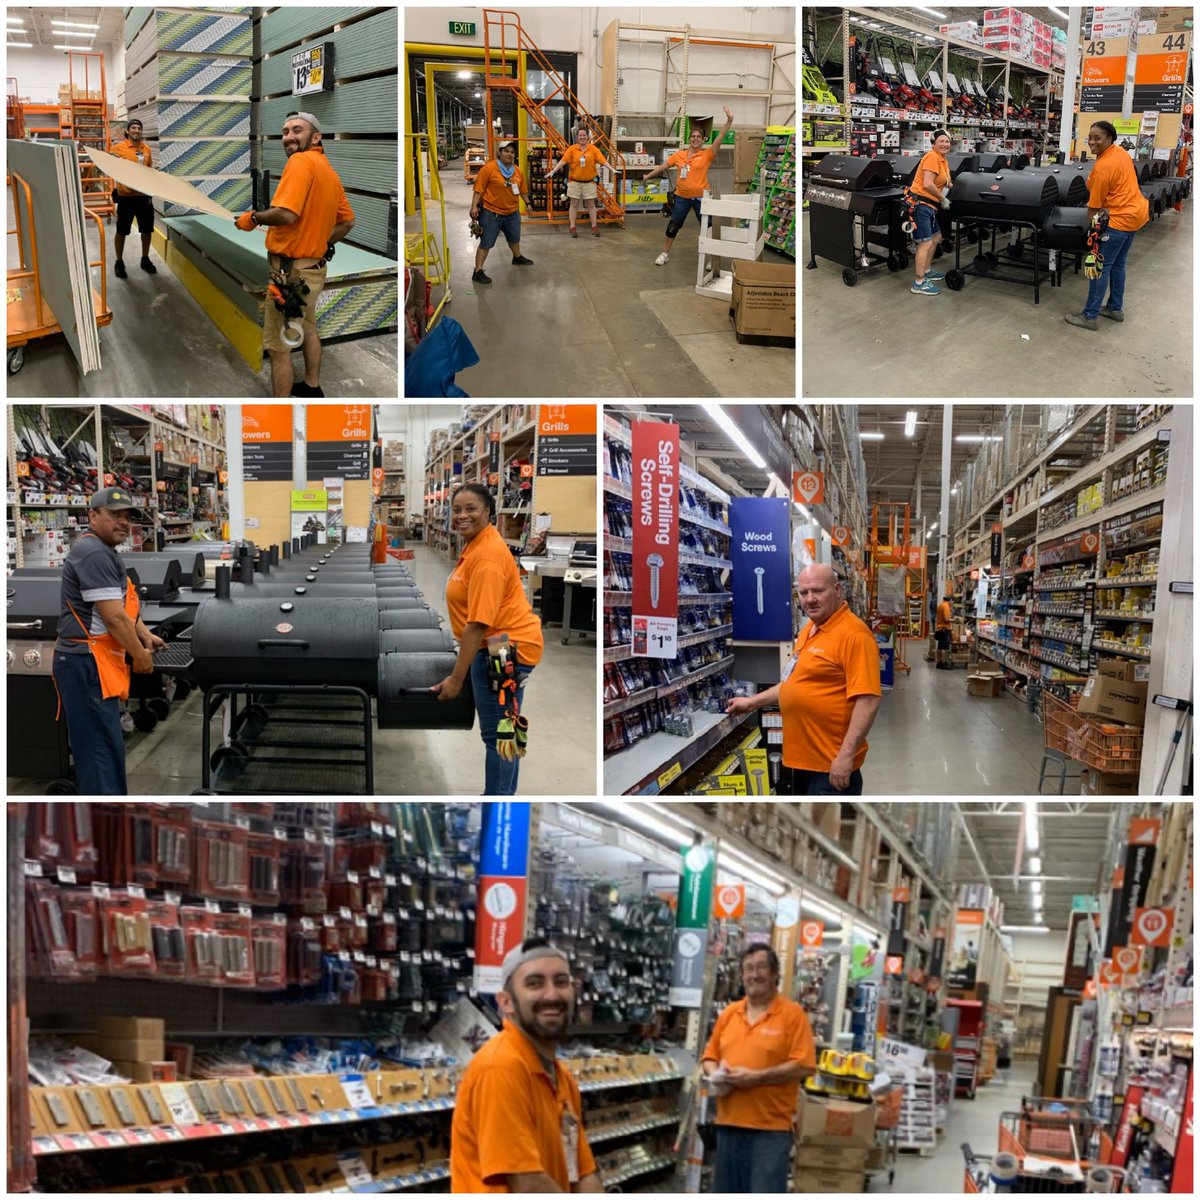 Getting things packed out here at #526 !! A little weekend support from the MET team! #BOOM #teamworkmakesthedreamwork #storepartnership